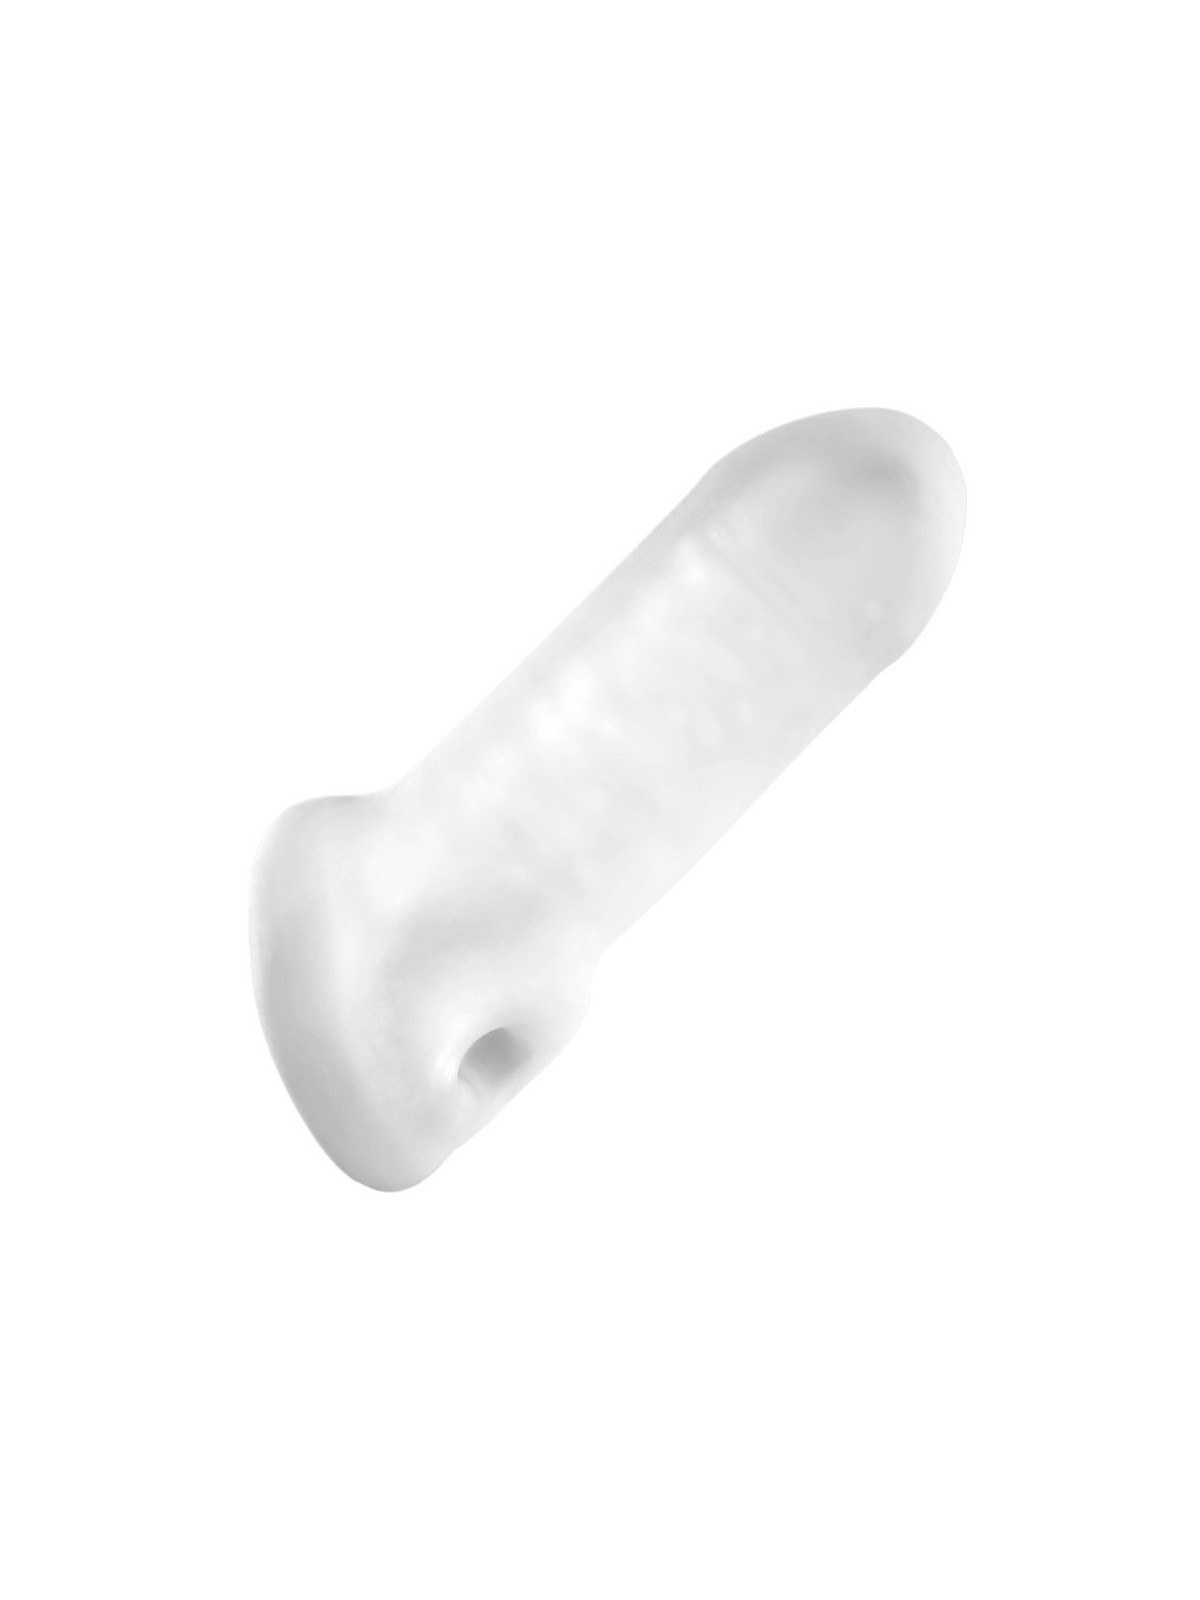 Penis extension Fat Boy Original Penis Wool 14 cm - Width + 2.5cm This Fat Boy penis sheath is designed with a shape that allows